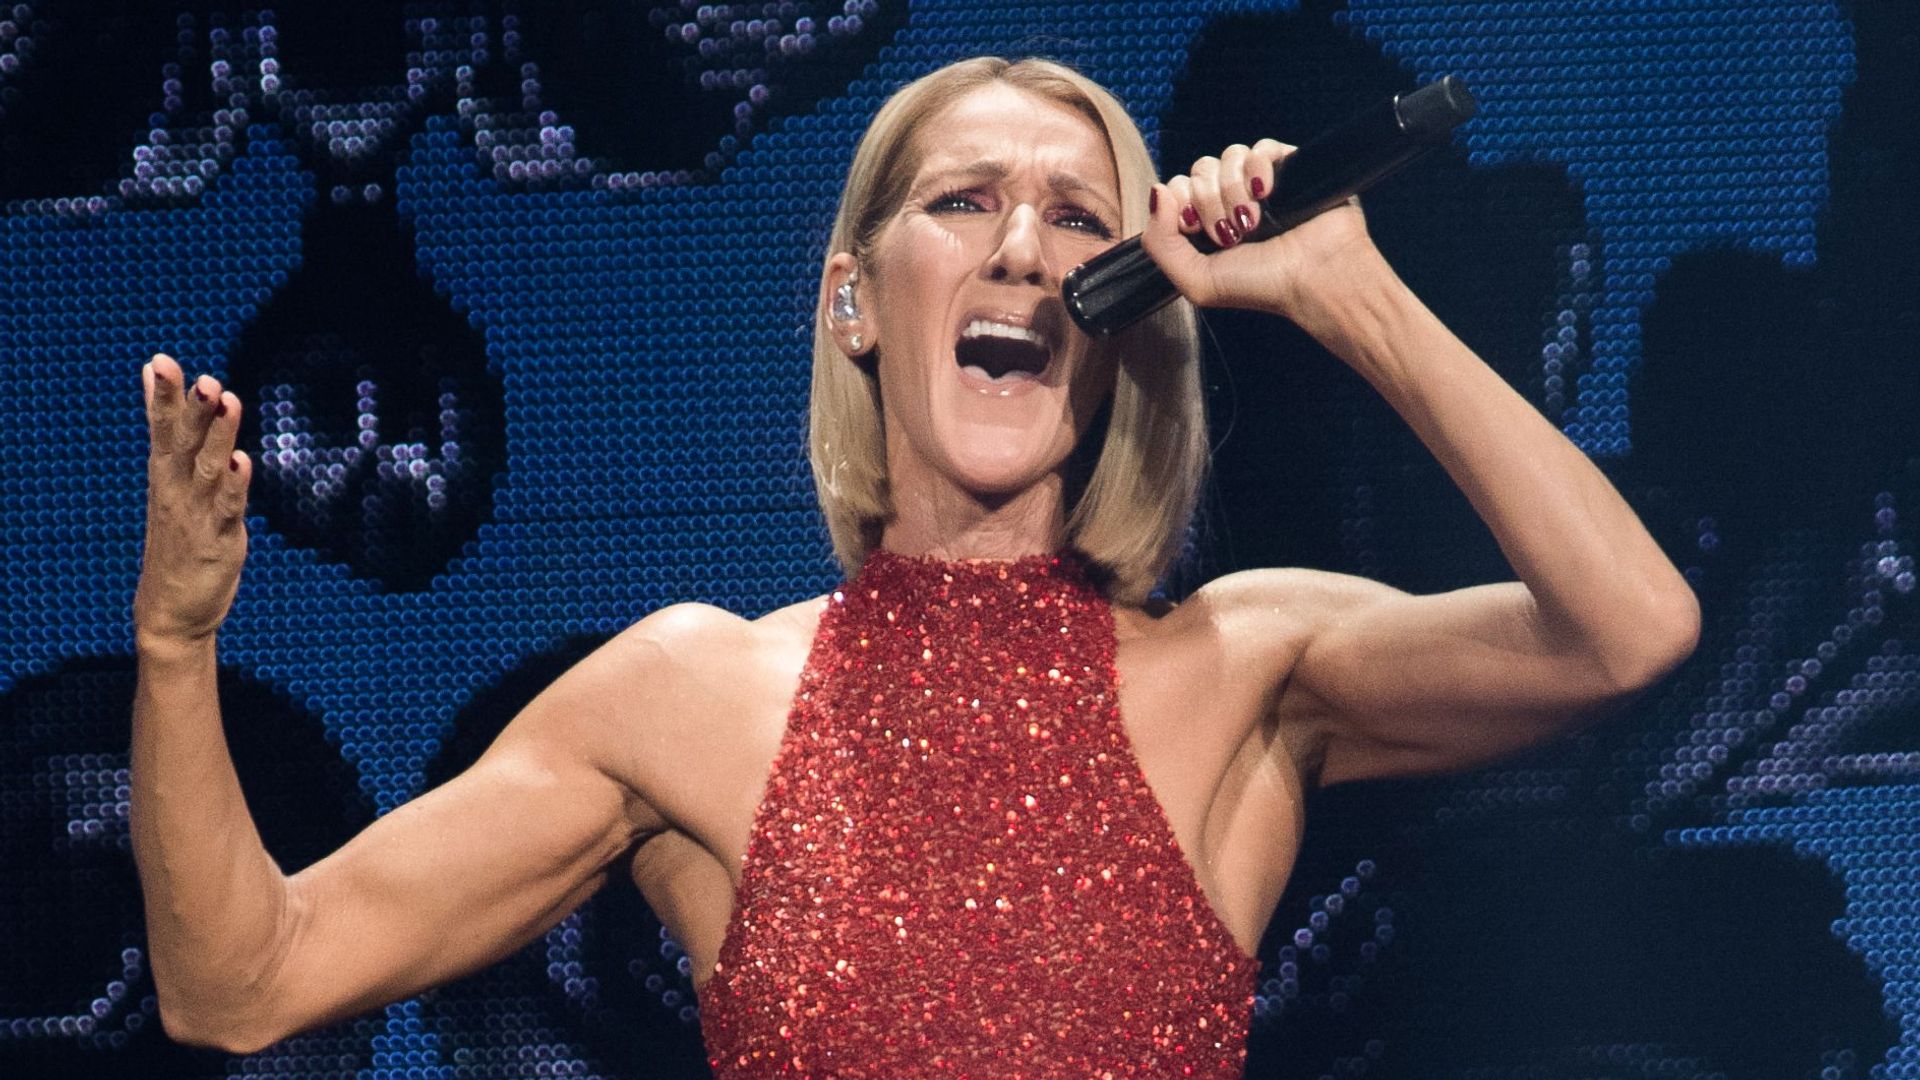 Celine Dion performs on opening night of world tour Courage in 2019